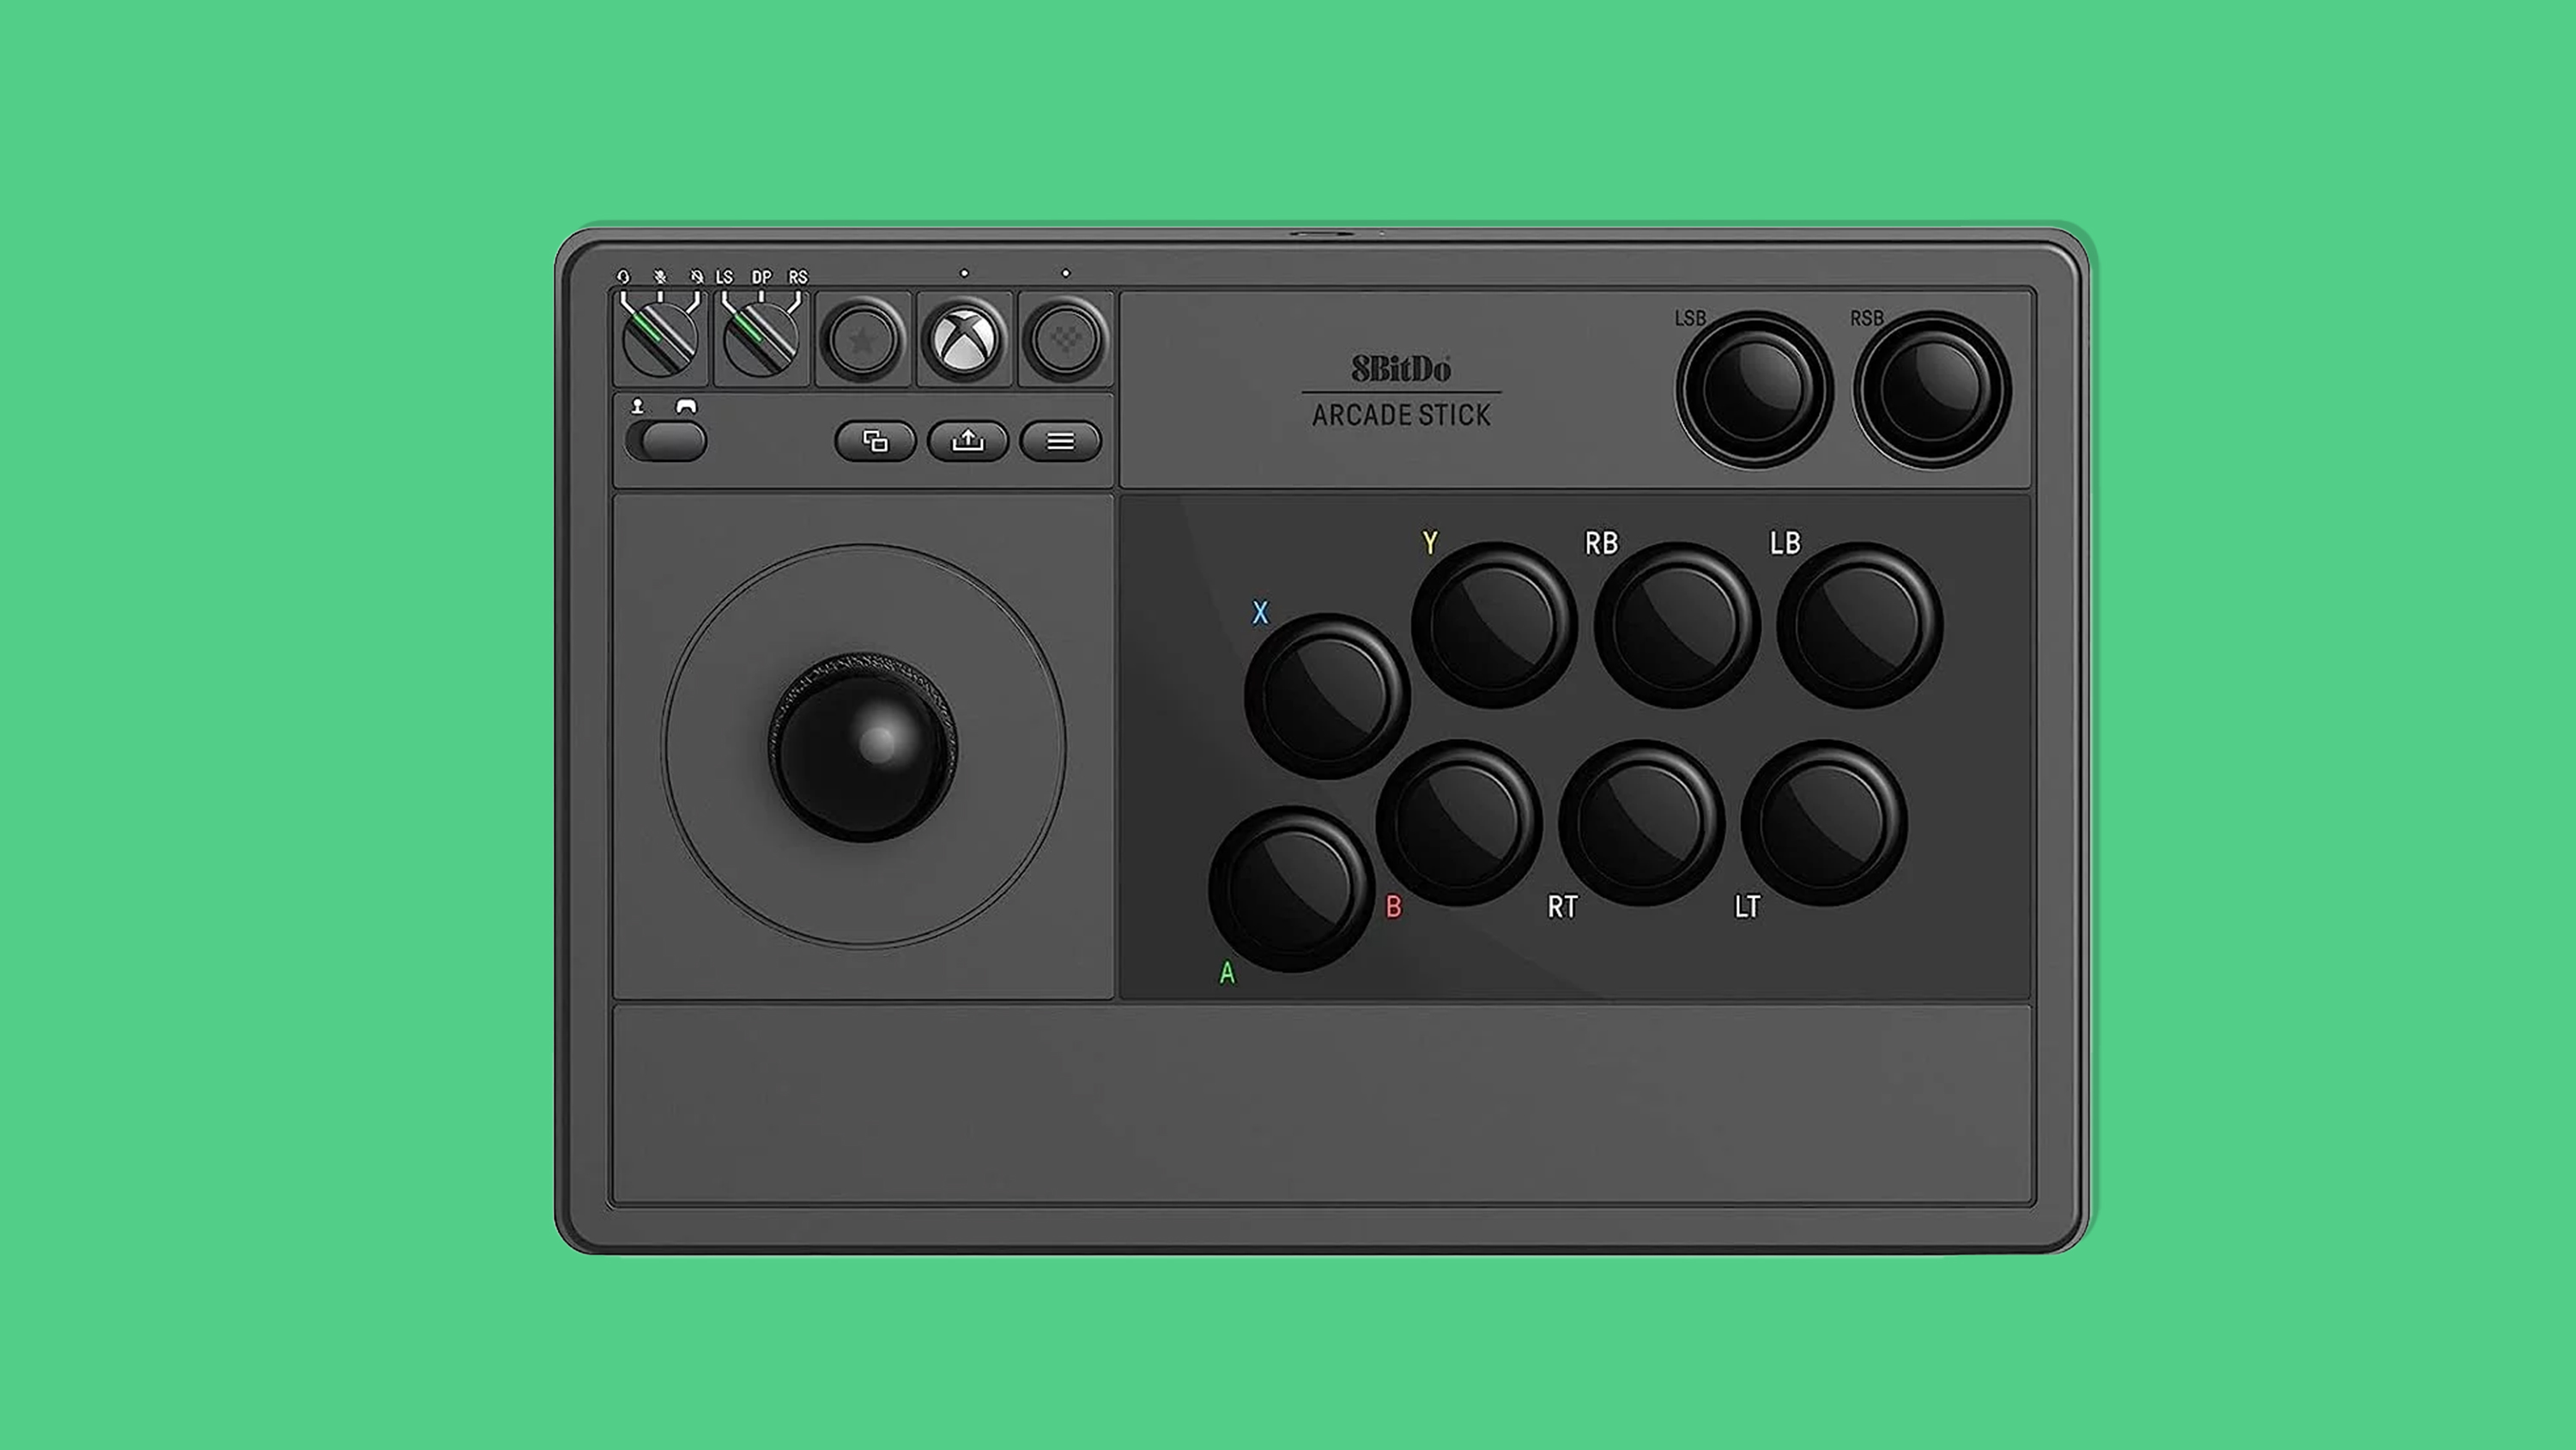 The 8BitDo Arcade Stick for Xbox Series X|S on a green background.